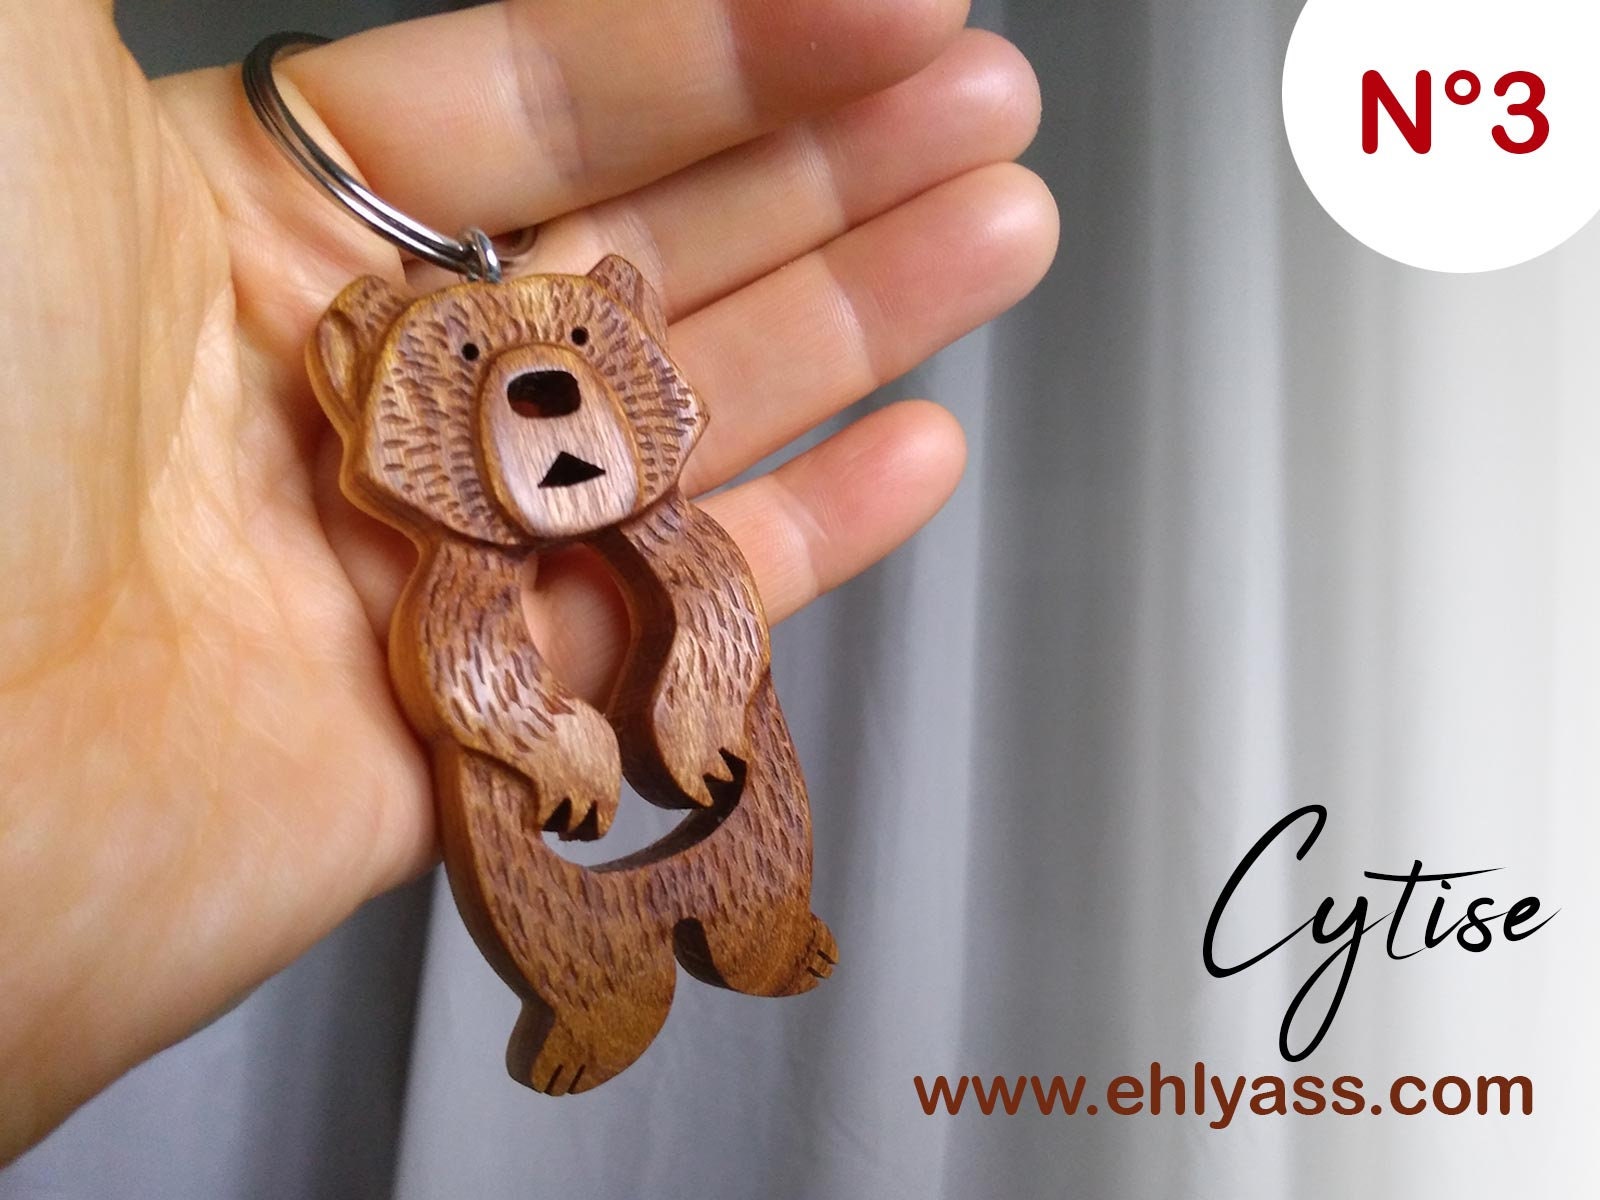 Bear Couple Keychains Friendship or Relationship Matching Wooden Keychain  Set 